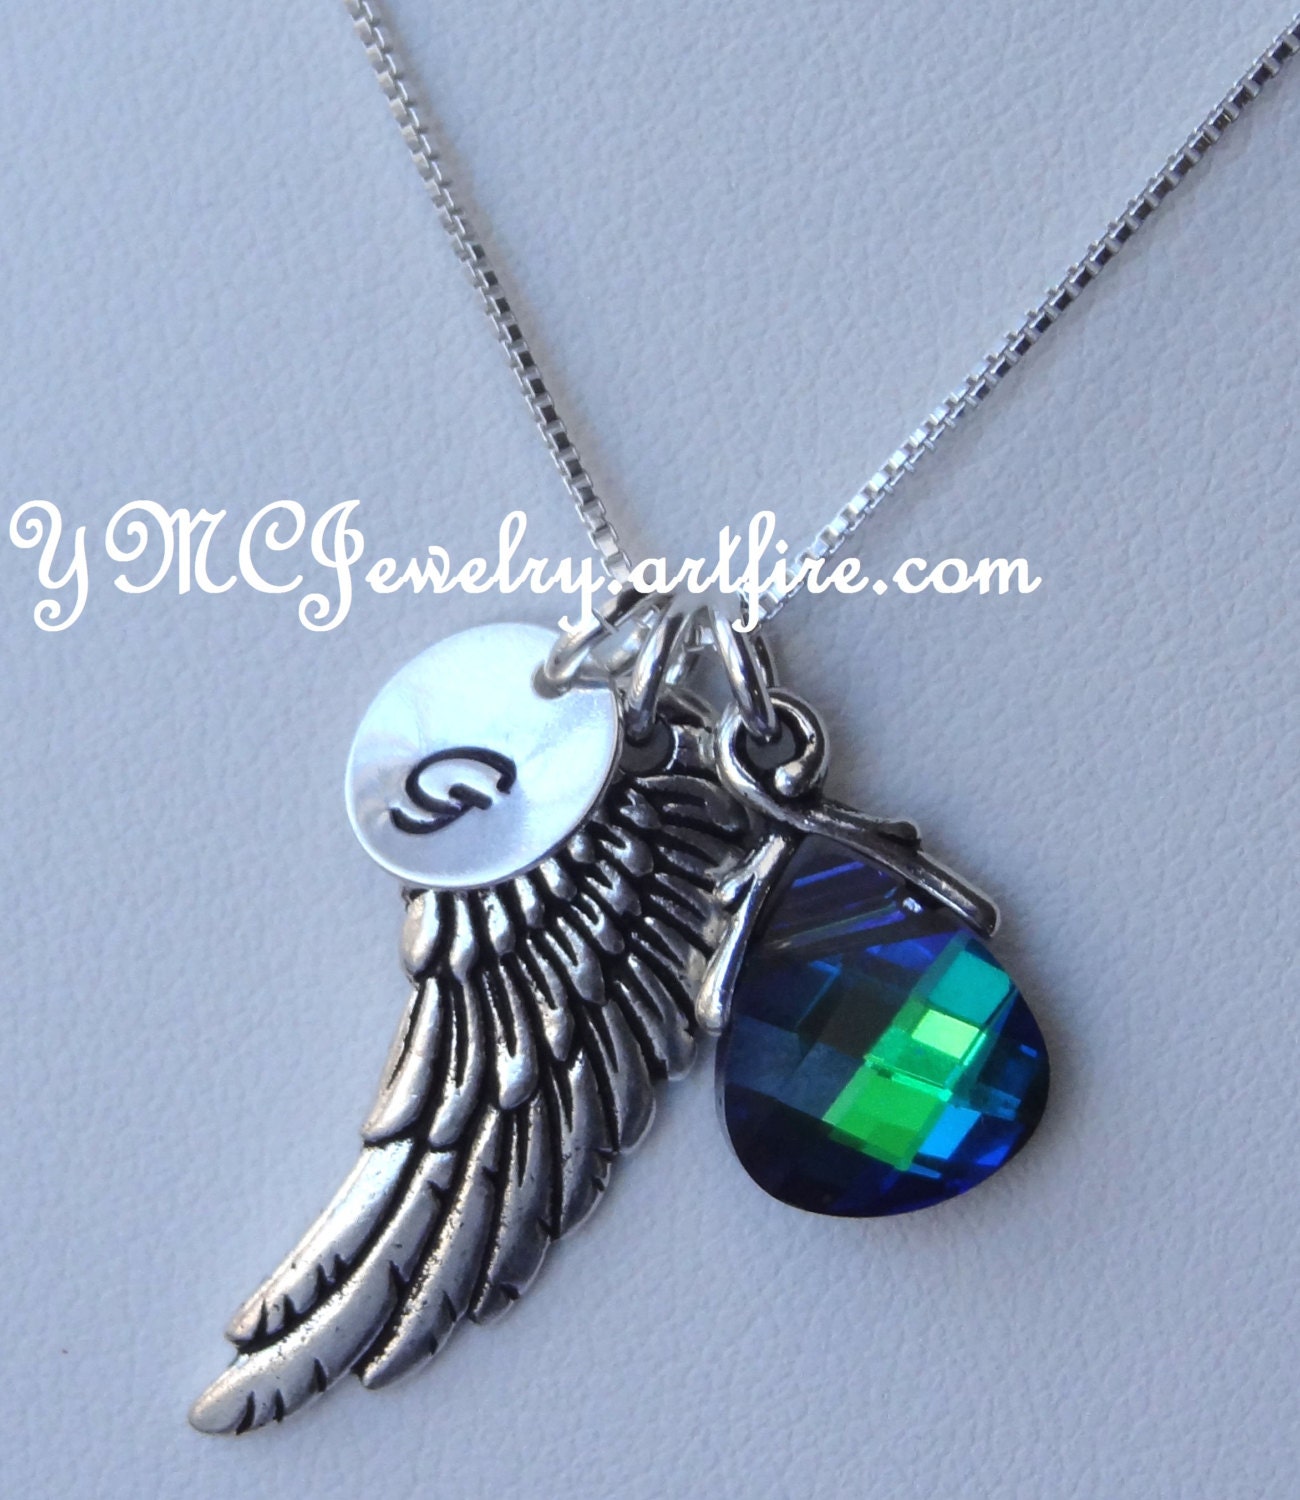 Remembrance Angel Wing Necklace,Sympathy Bereavement Gift,Memorial Jewelry,Loss of Husband Baby Child Brother Sister Friend,Grief Necklace